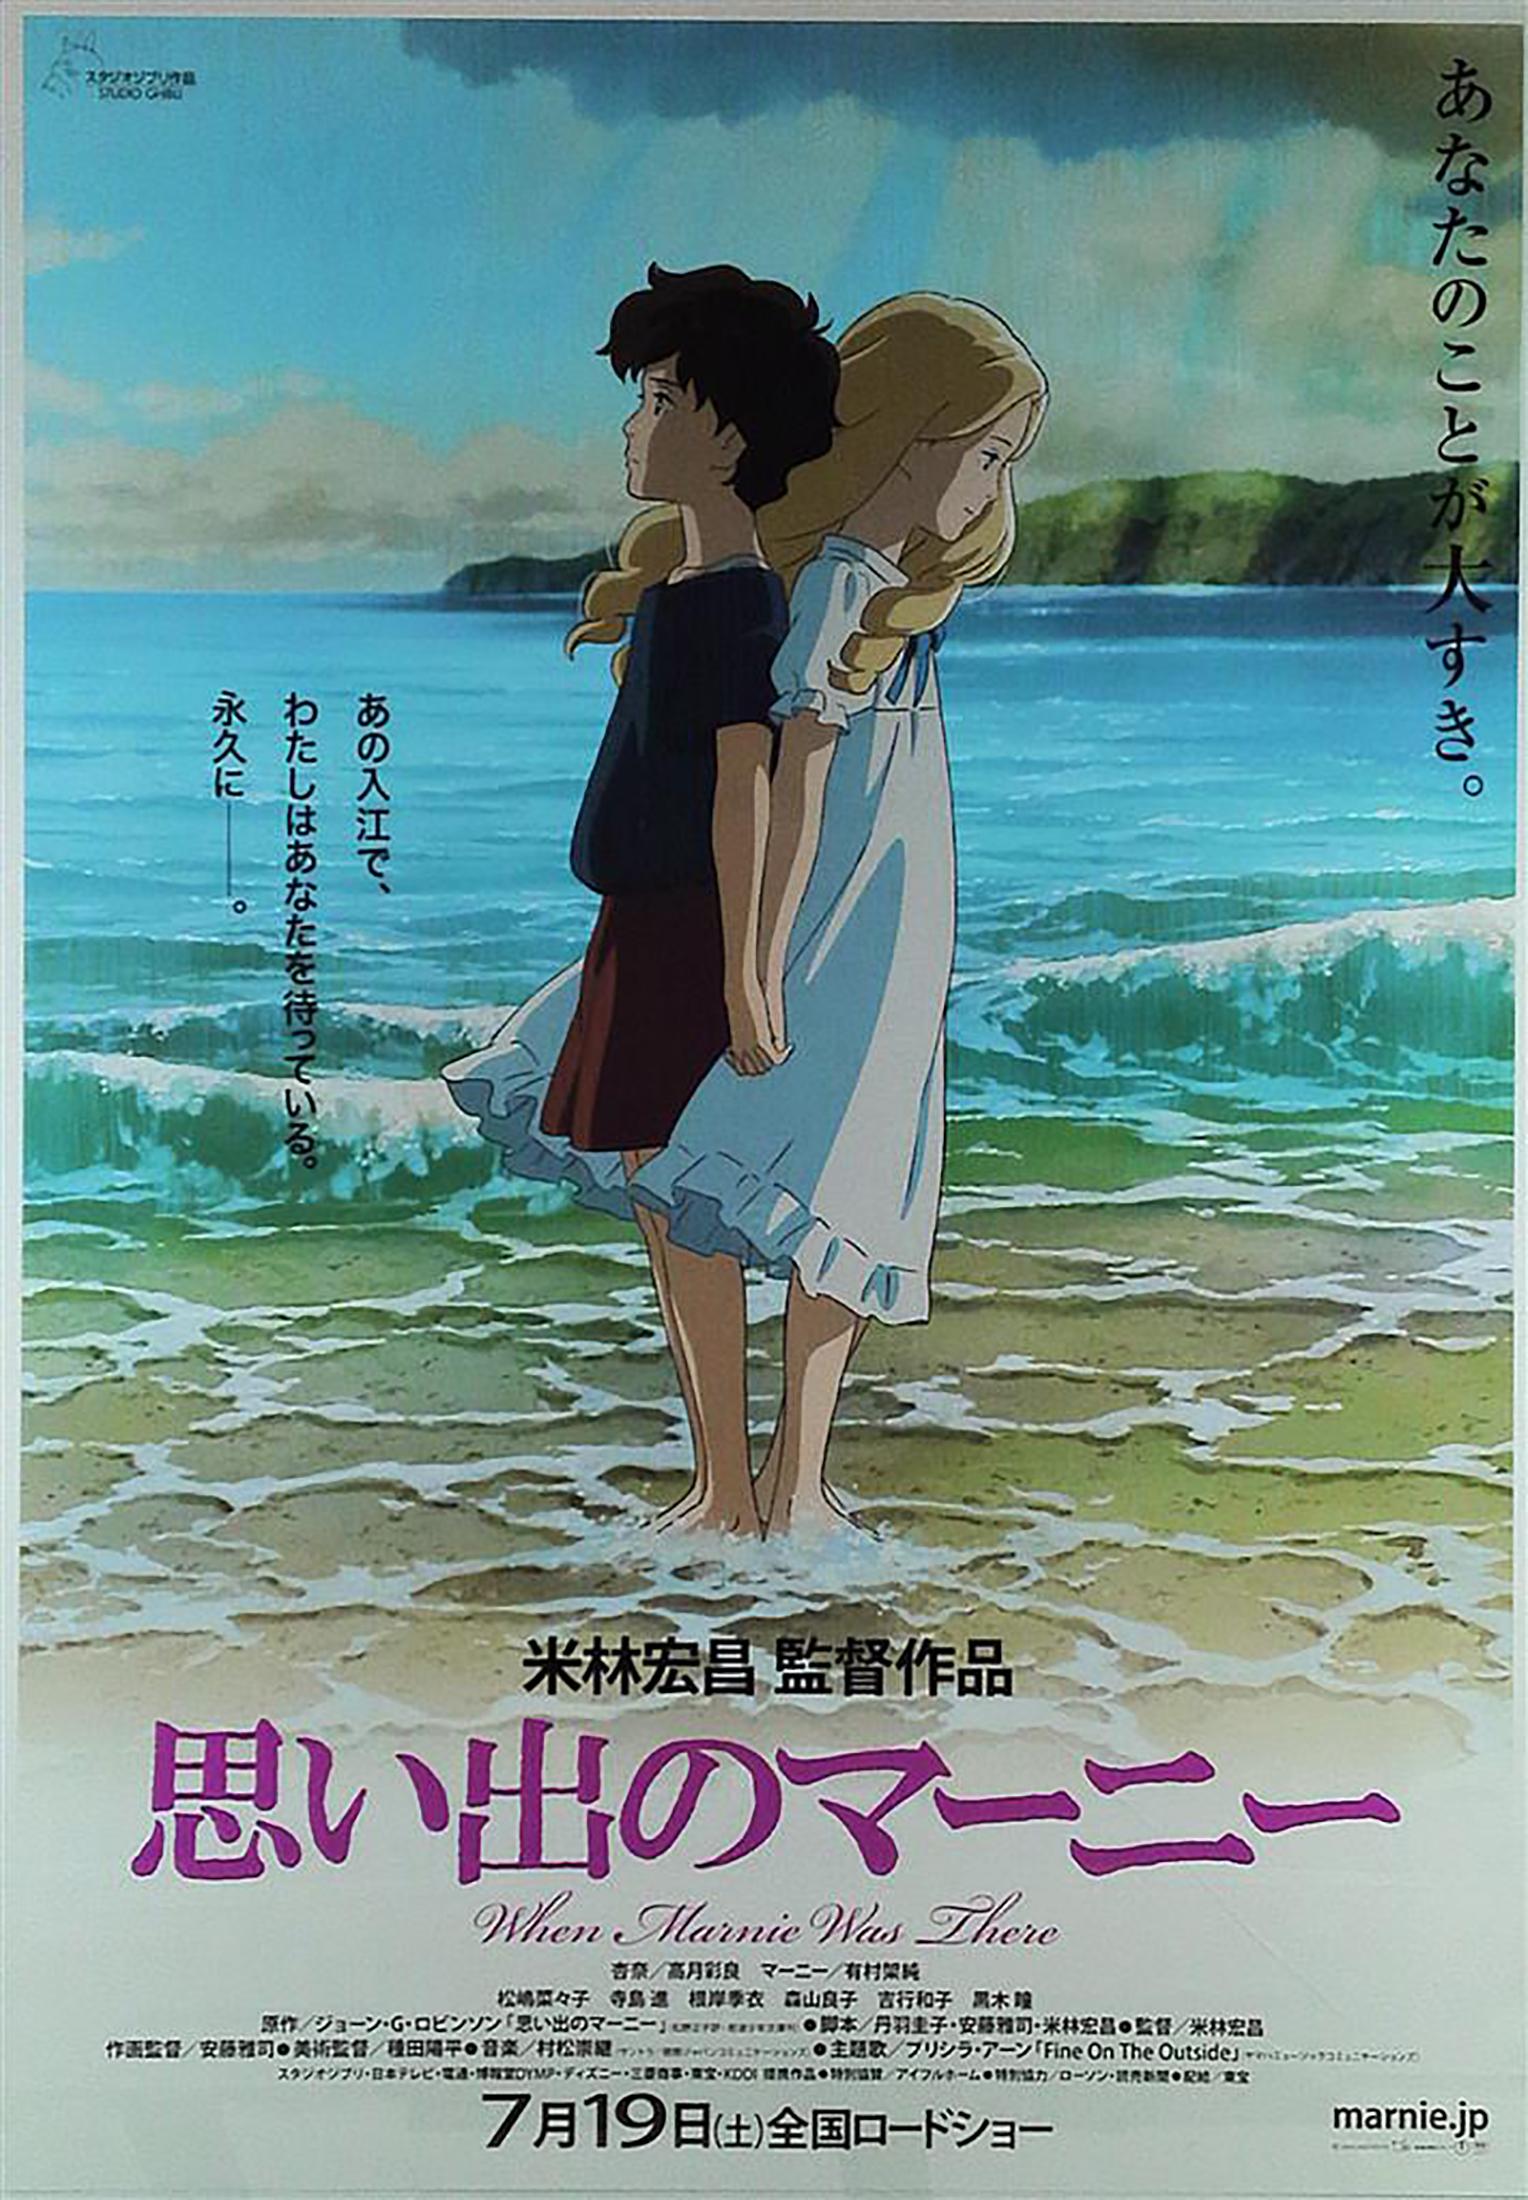 When Marnie Was There Original Vintage Large Theatrical Poster, Studio Ghibli - Print by Unknown